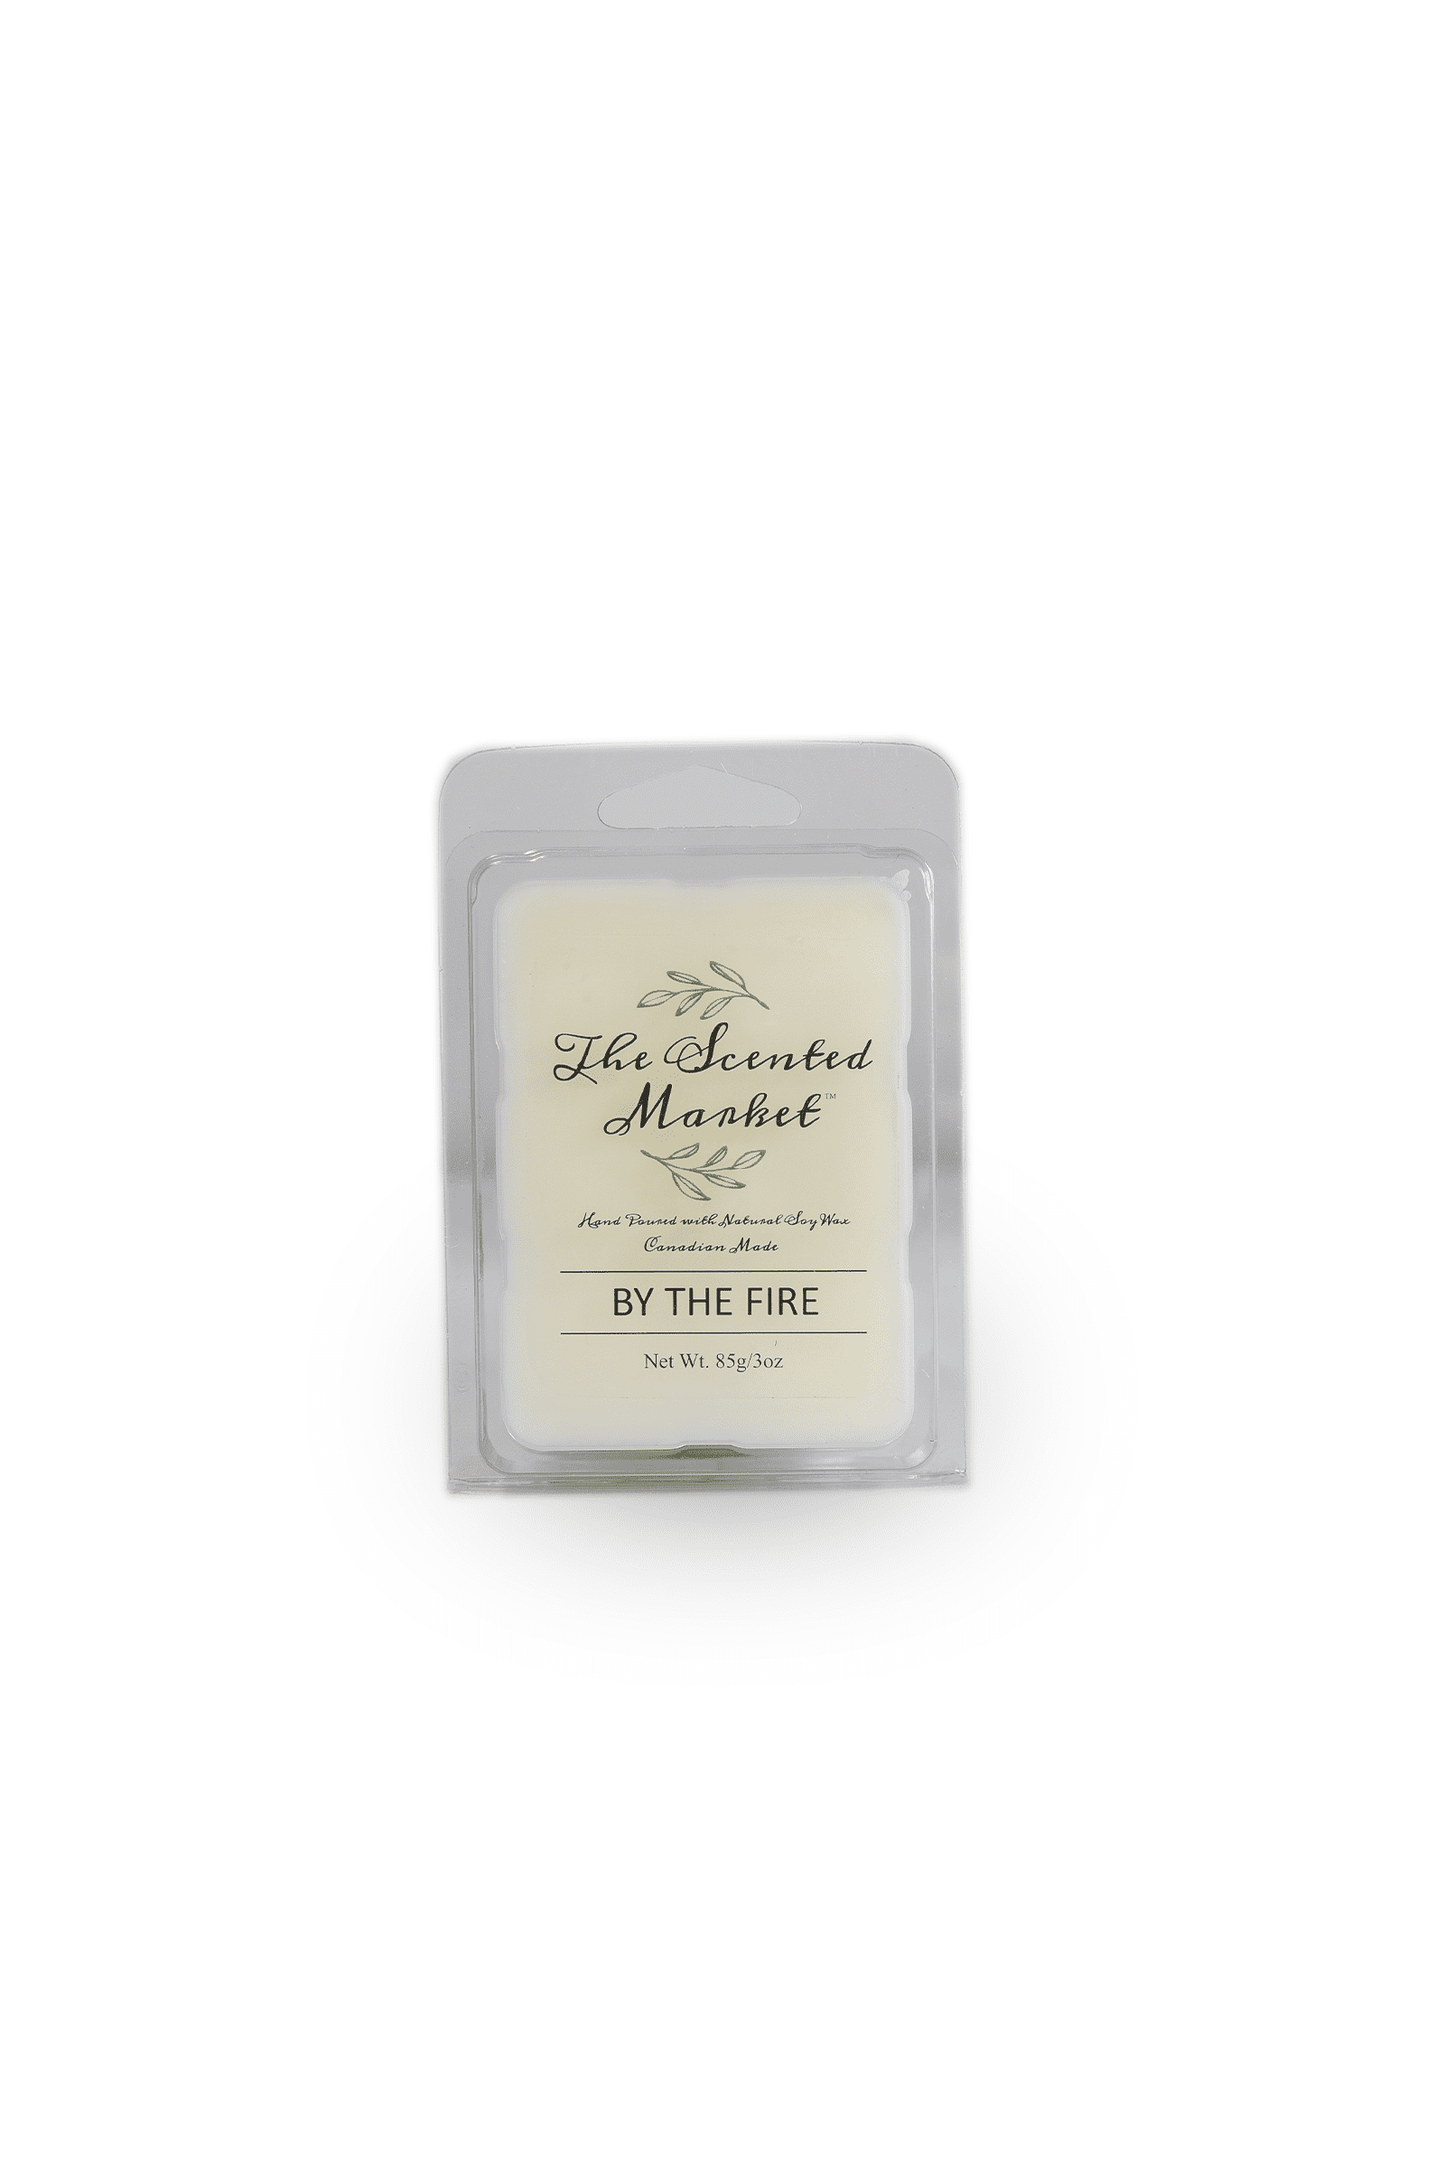 BY THE FIRE Soy Wax Melt